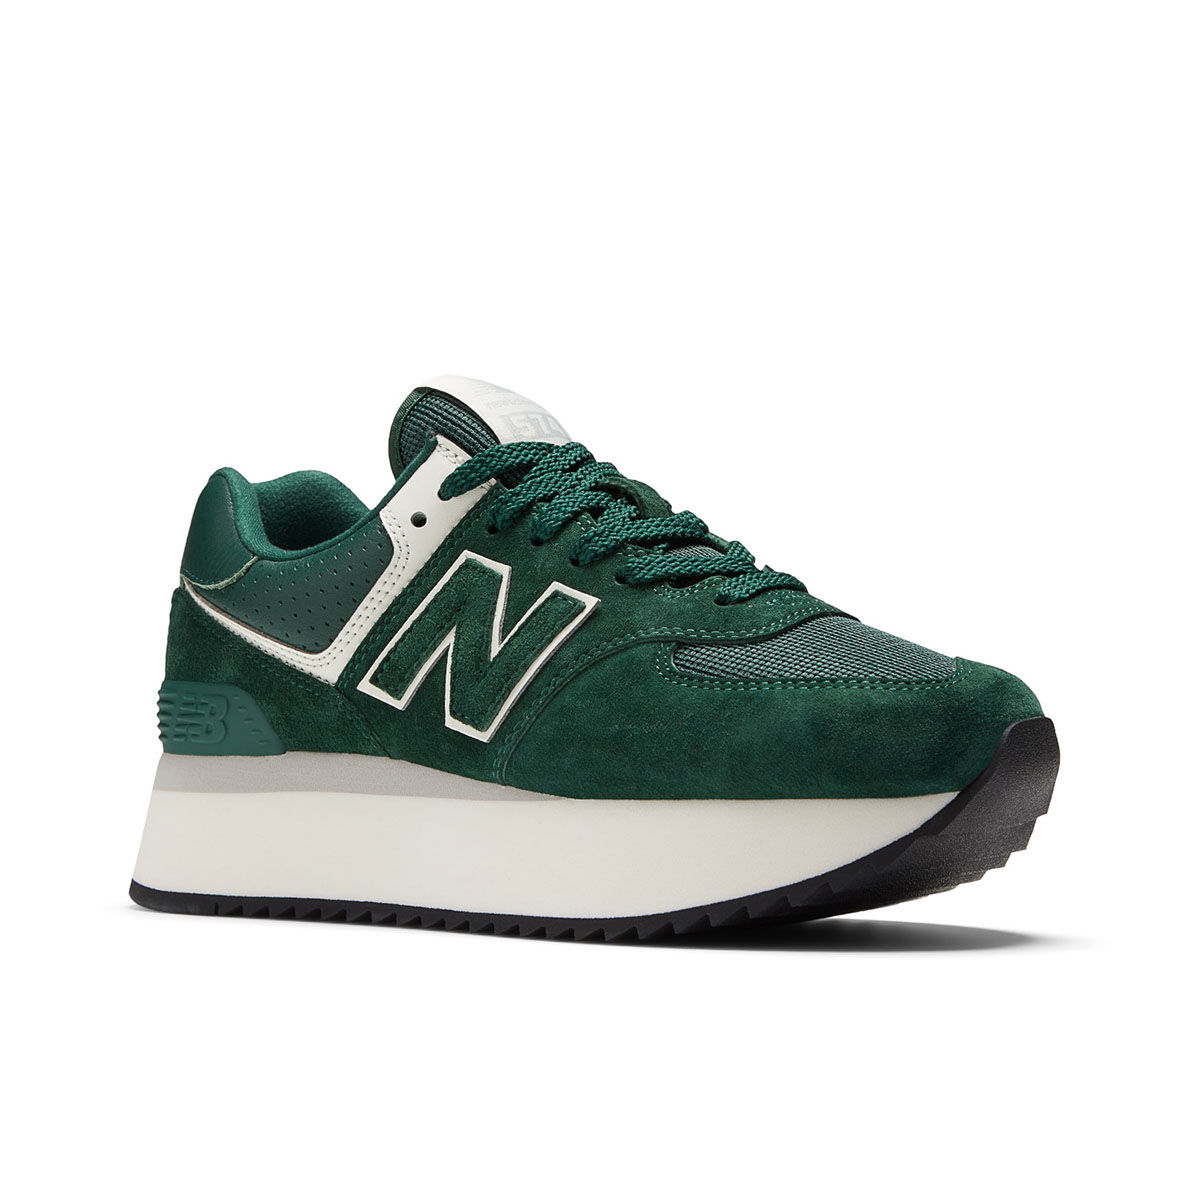 Share more than 118 dark green sneakers best